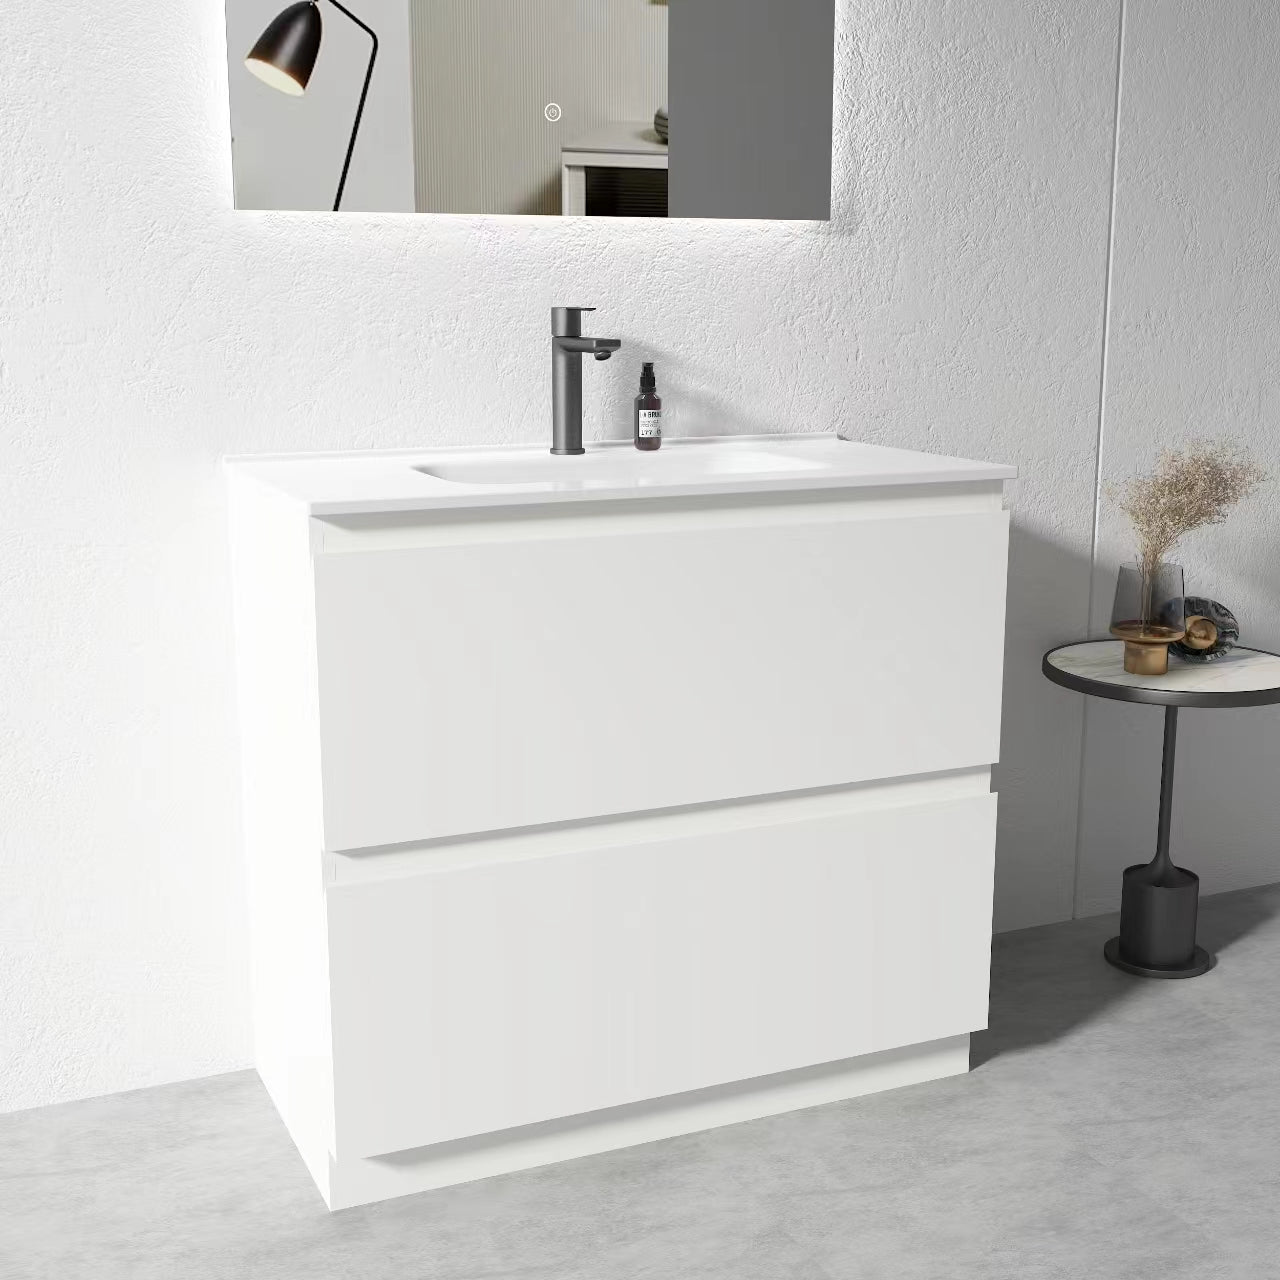 900mm Plywood Gloss White Floor Standing Vanity Unit With Ceramic Basin